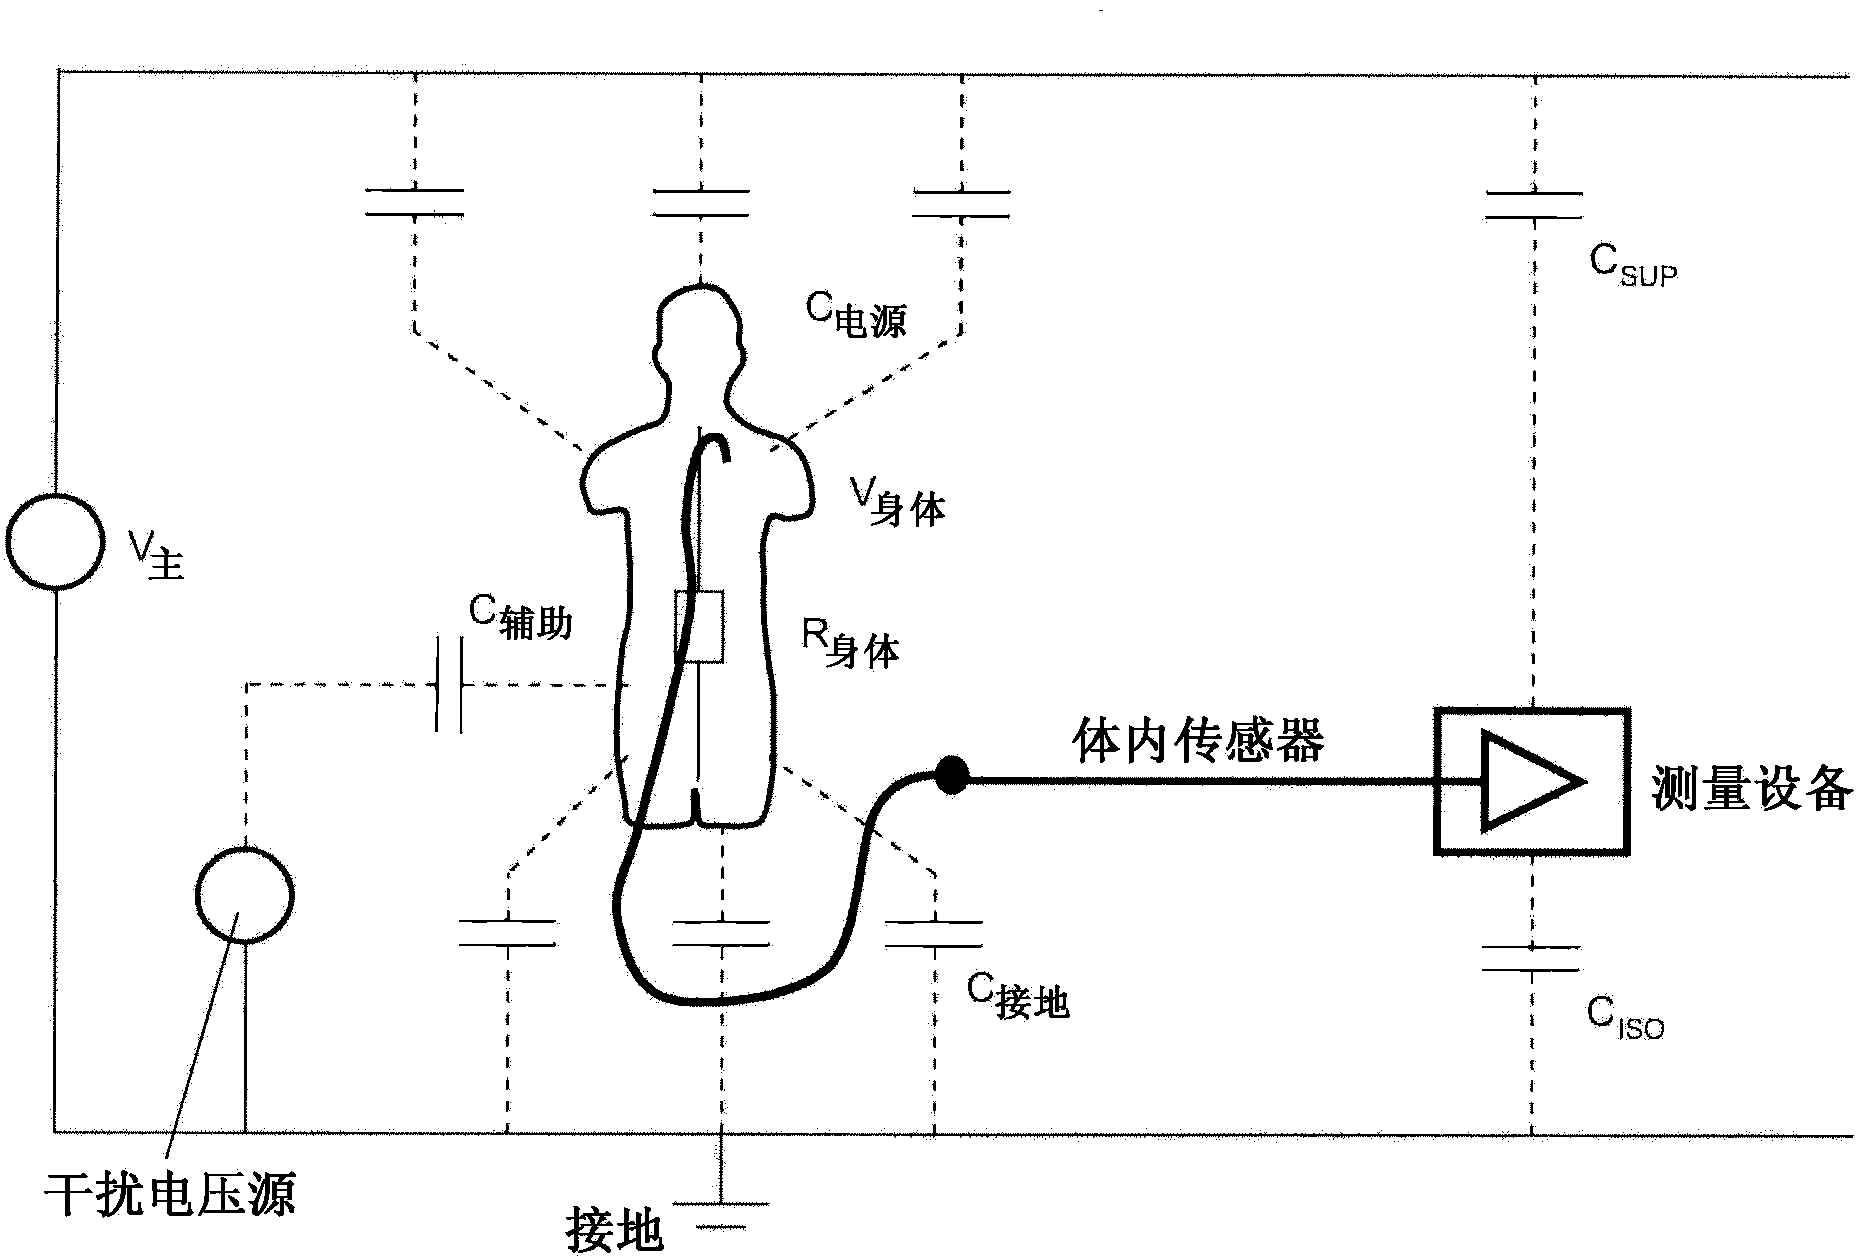 Active interference-noise cancellation device, and a method in relation thereto